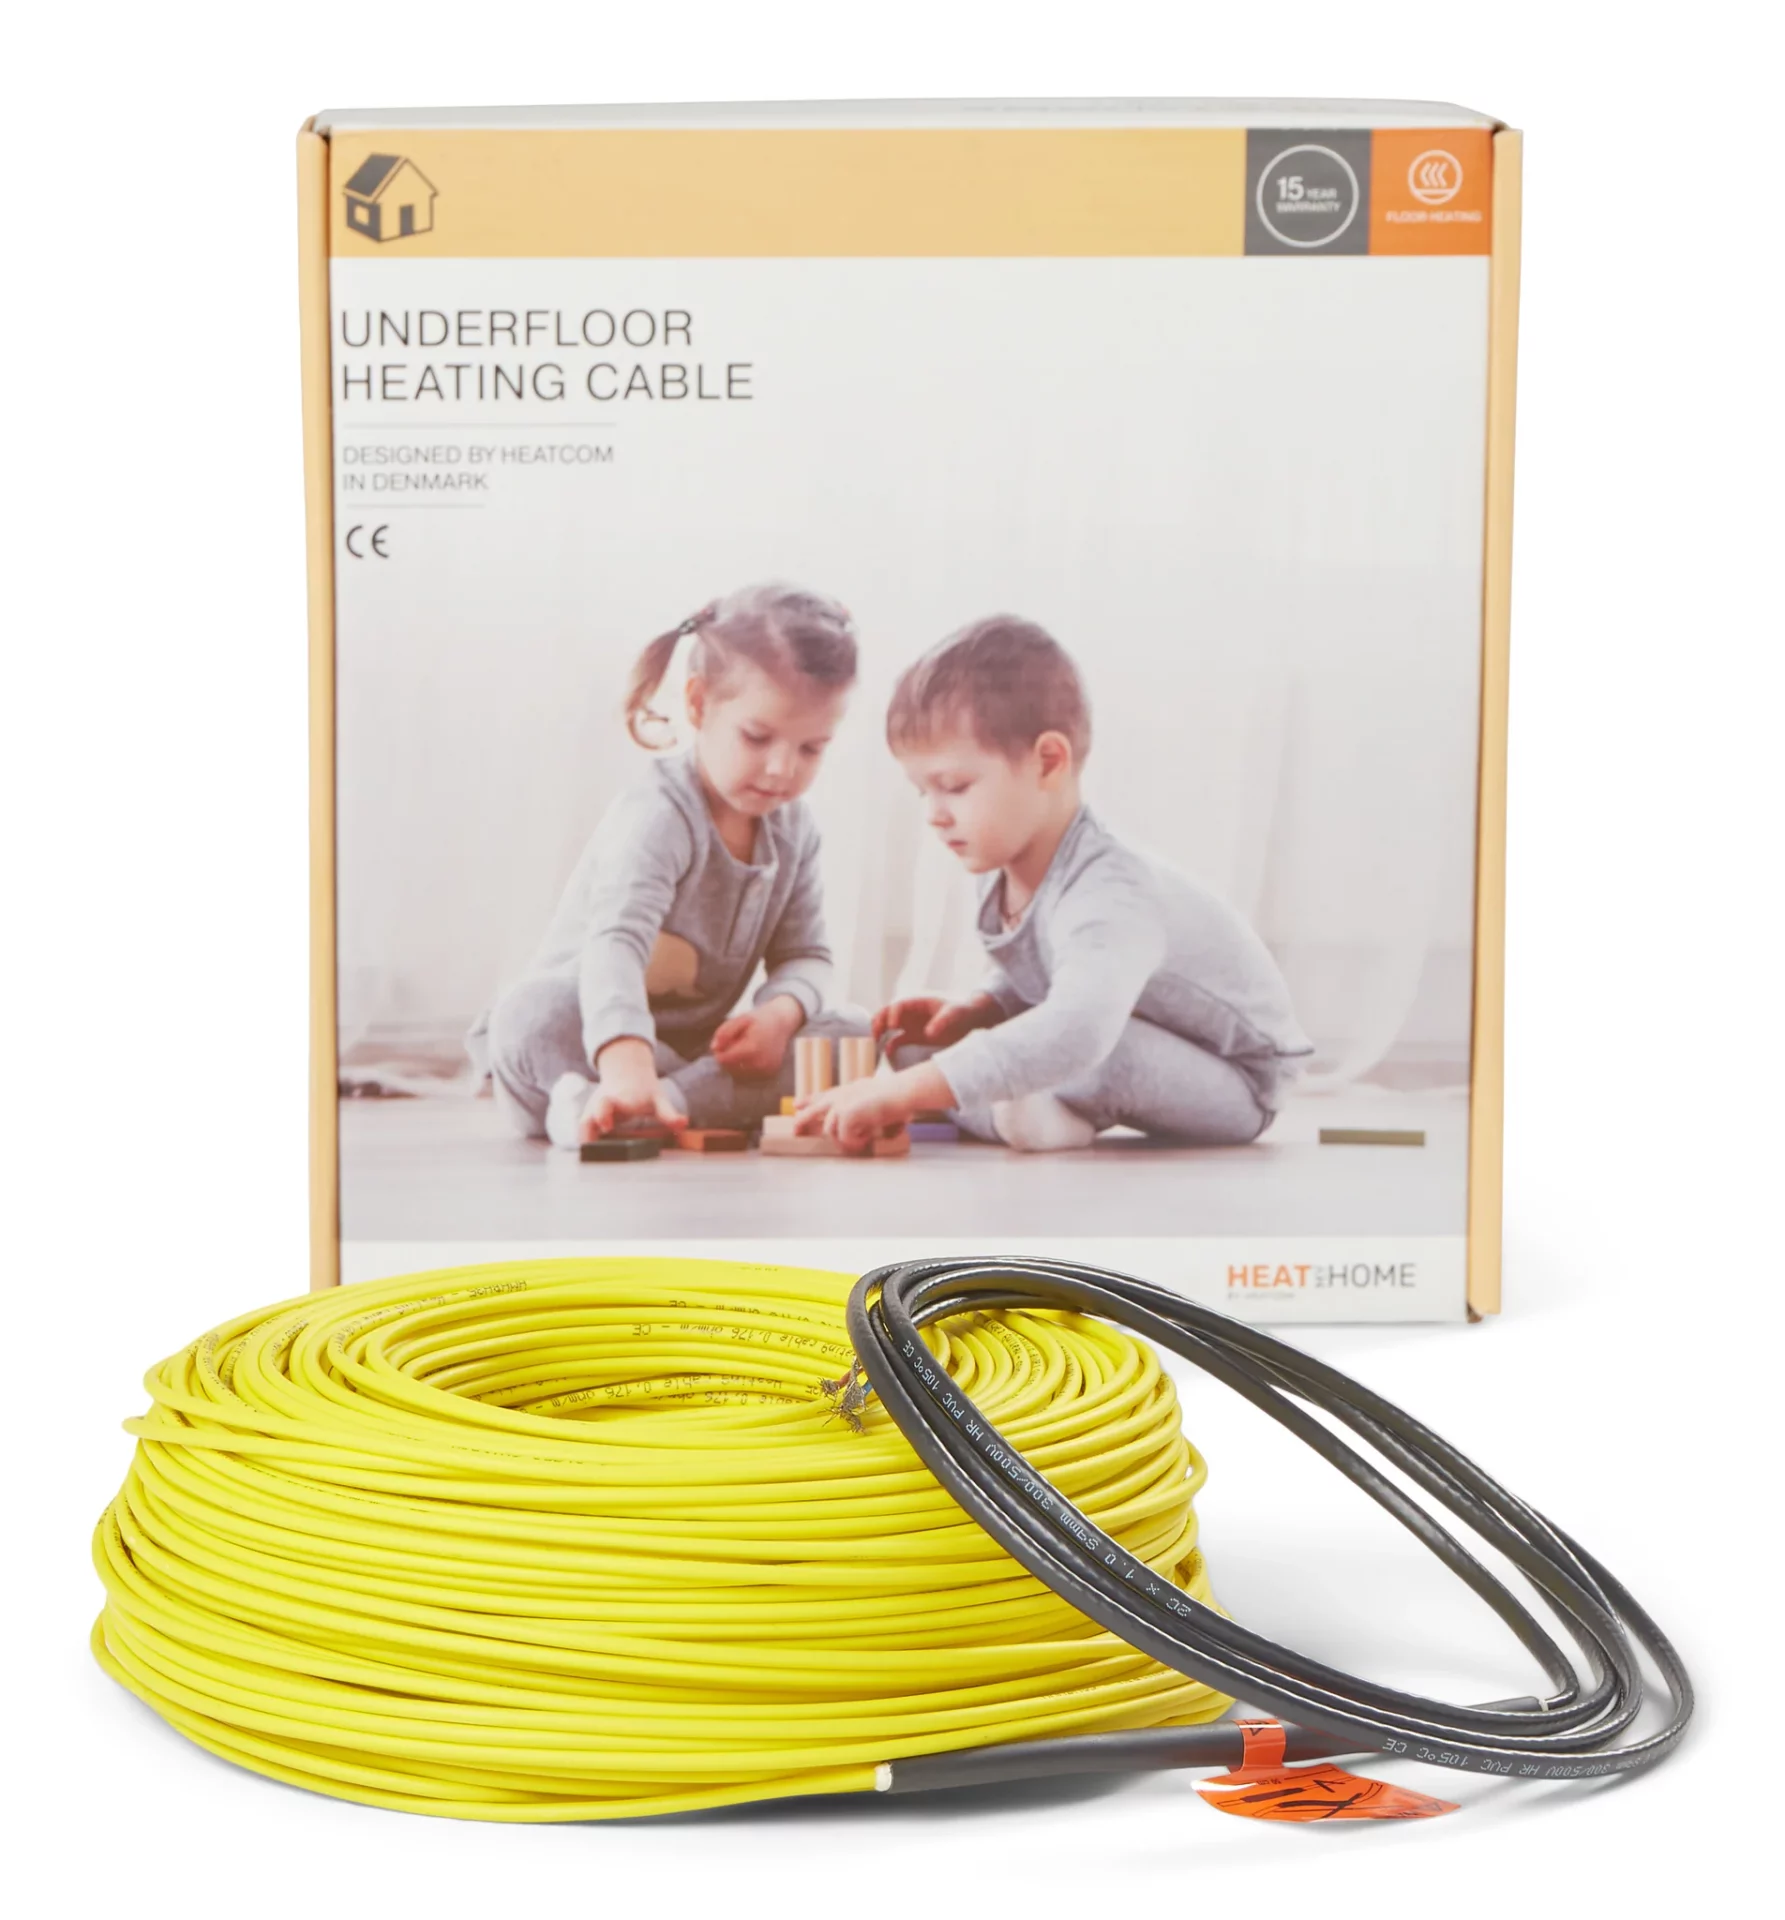 Heat My Home Undertile Heating Cable 8.4m 450W HMHCAB3.5-450W - West Midland Electrics | CCTV & Electrical Wholesaler